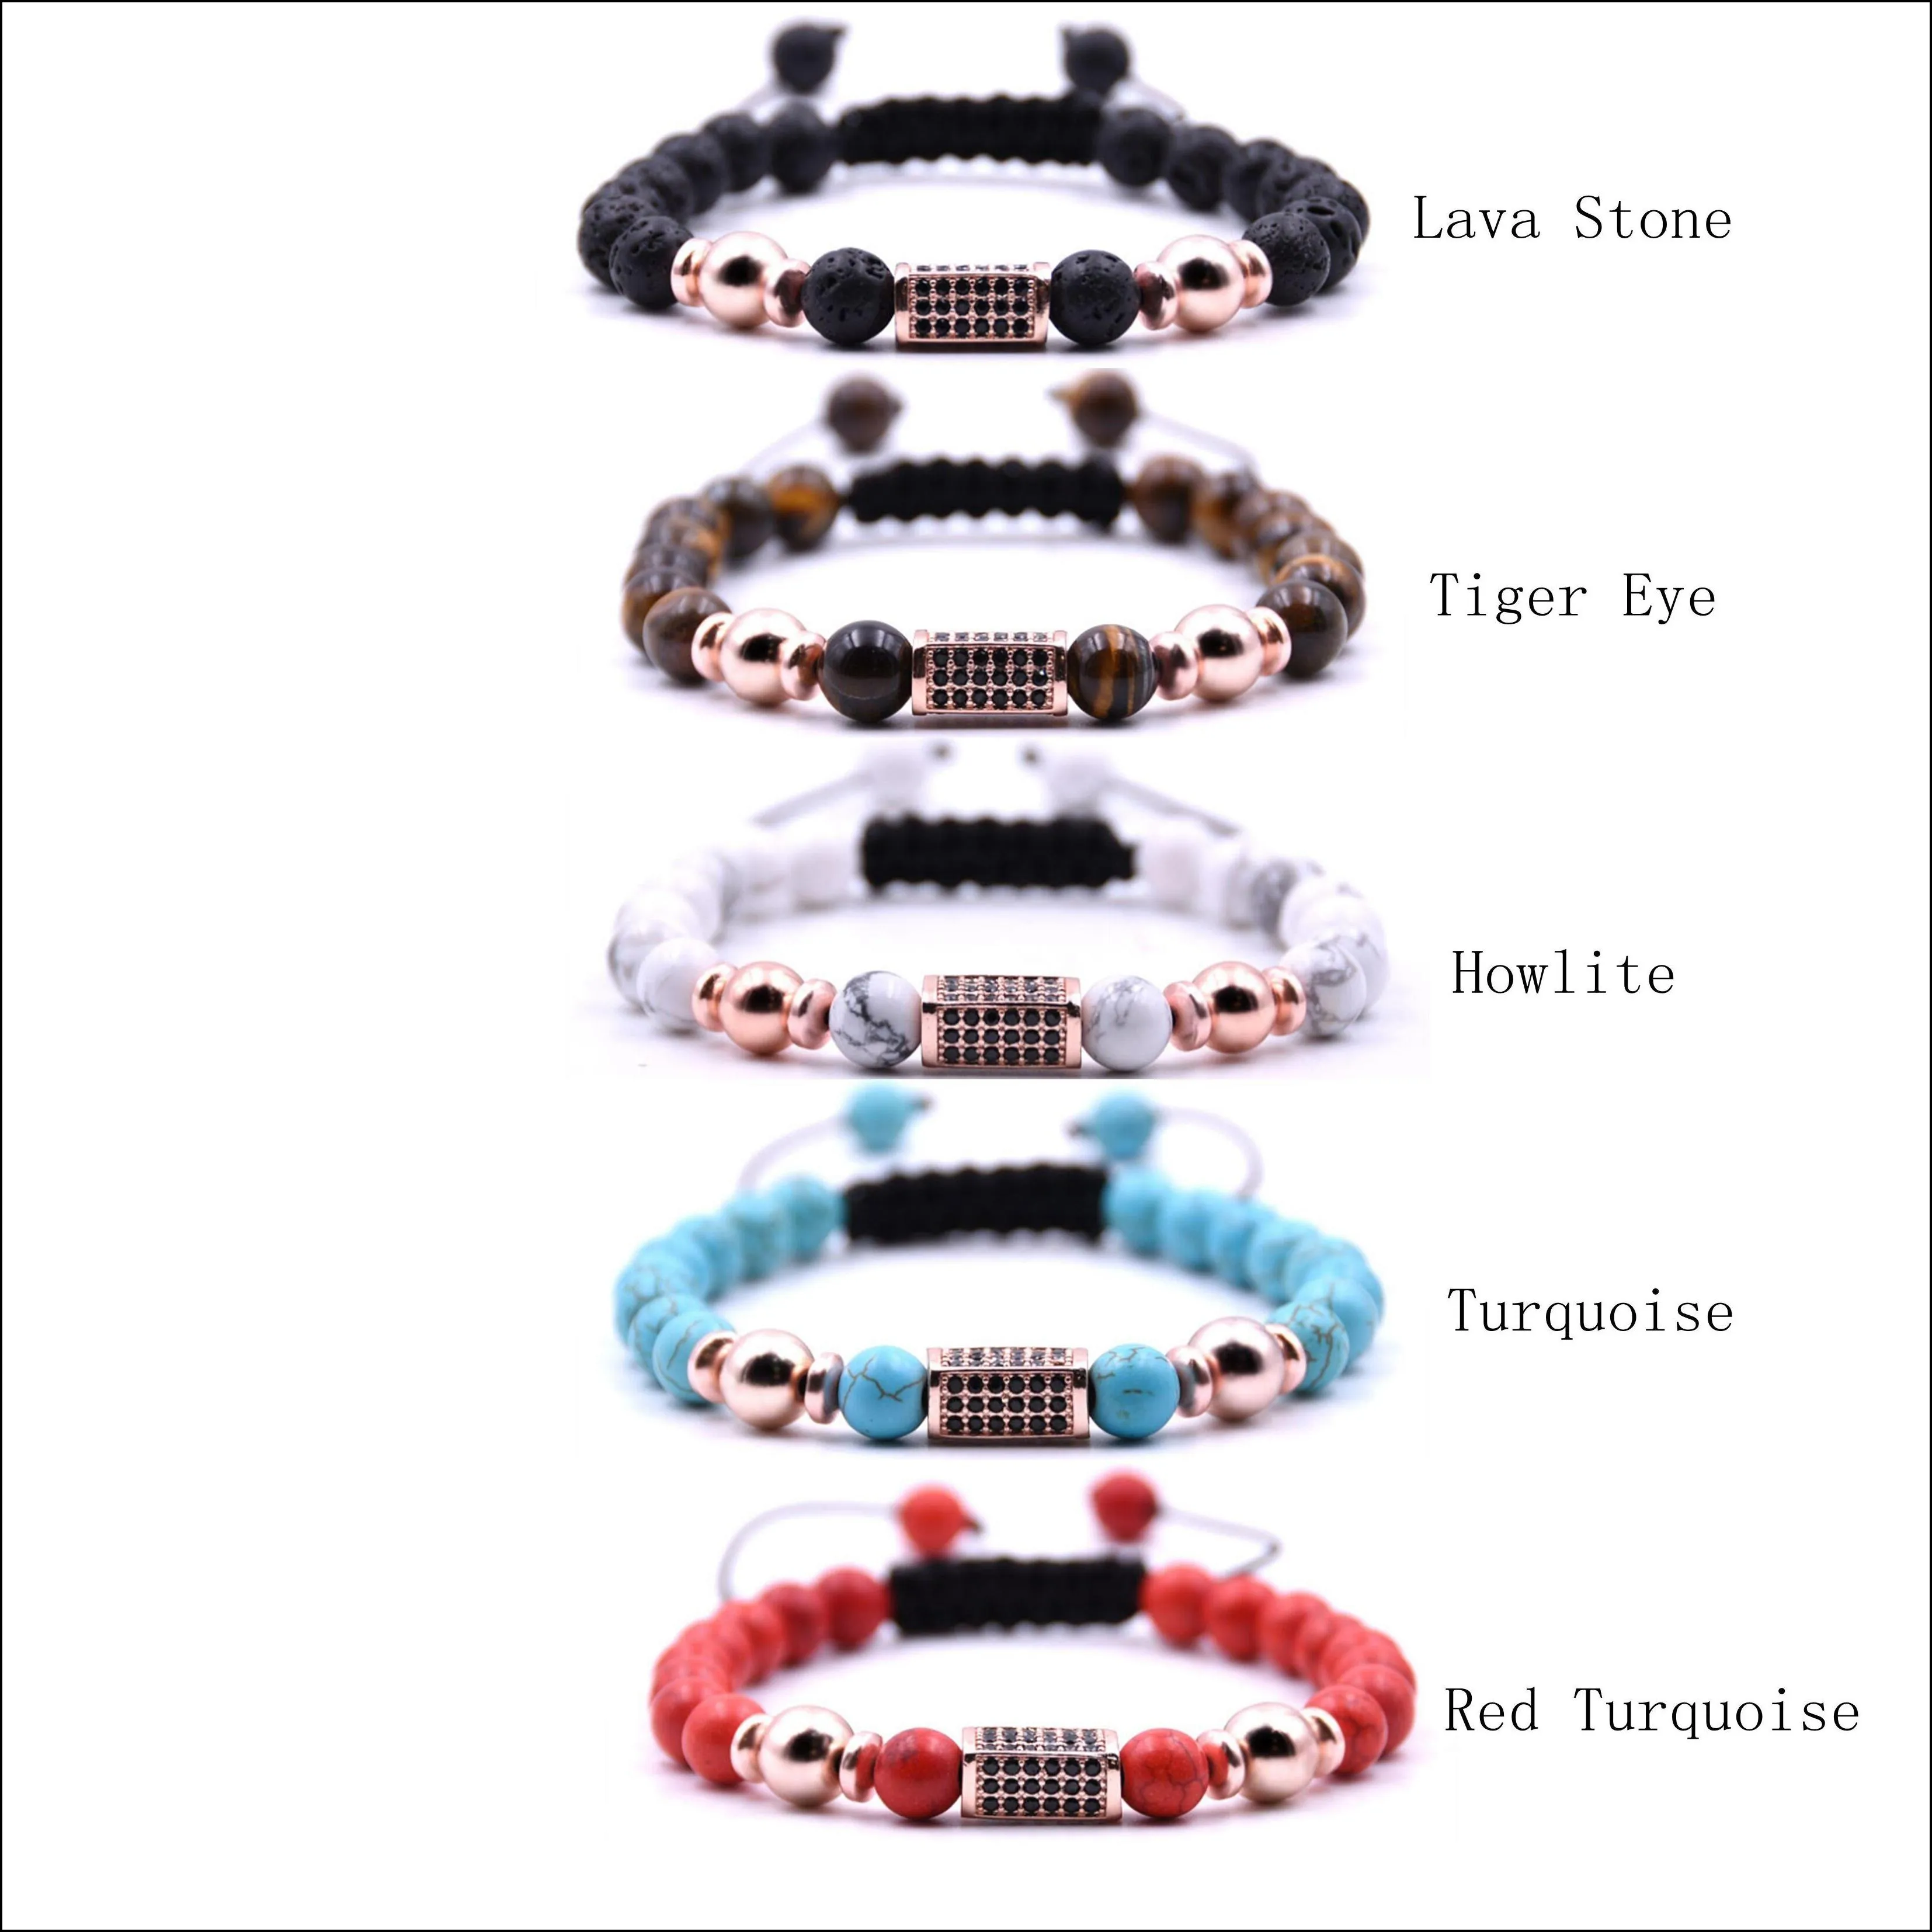 10pc/set 2018 new fashion high quality low price with 8mm natural stone lucky round beads woven bracelet for women men charm jewelry